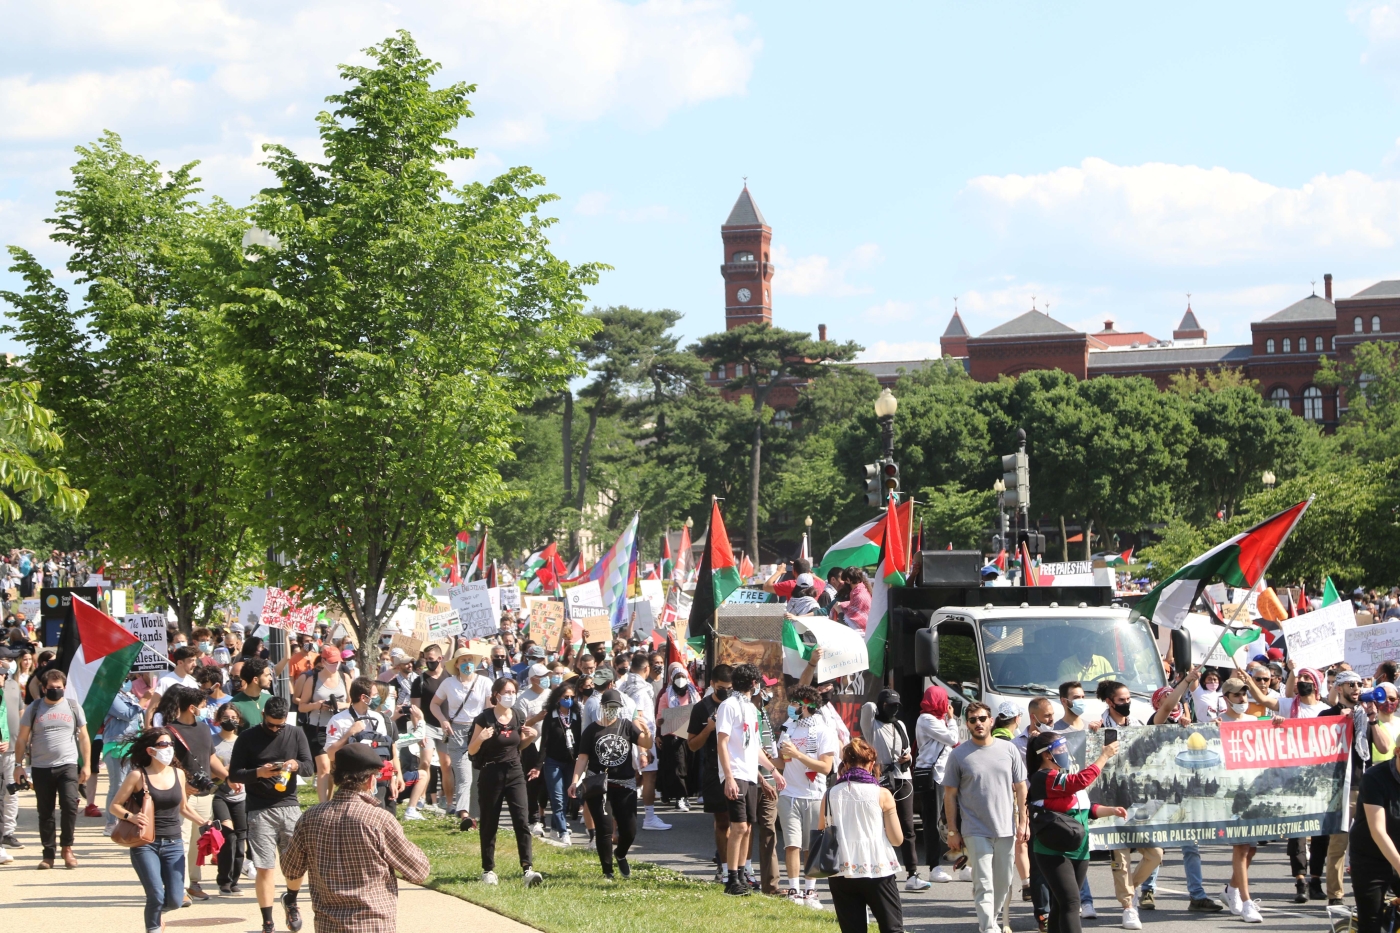 More than a thousand pro-Palestinian protesters marched in downtown Washington on Saturday, after US President Joe Biden reaffirmed Israel's right to defend itself in a call with Prime Minister Benjamin Netanyahu.